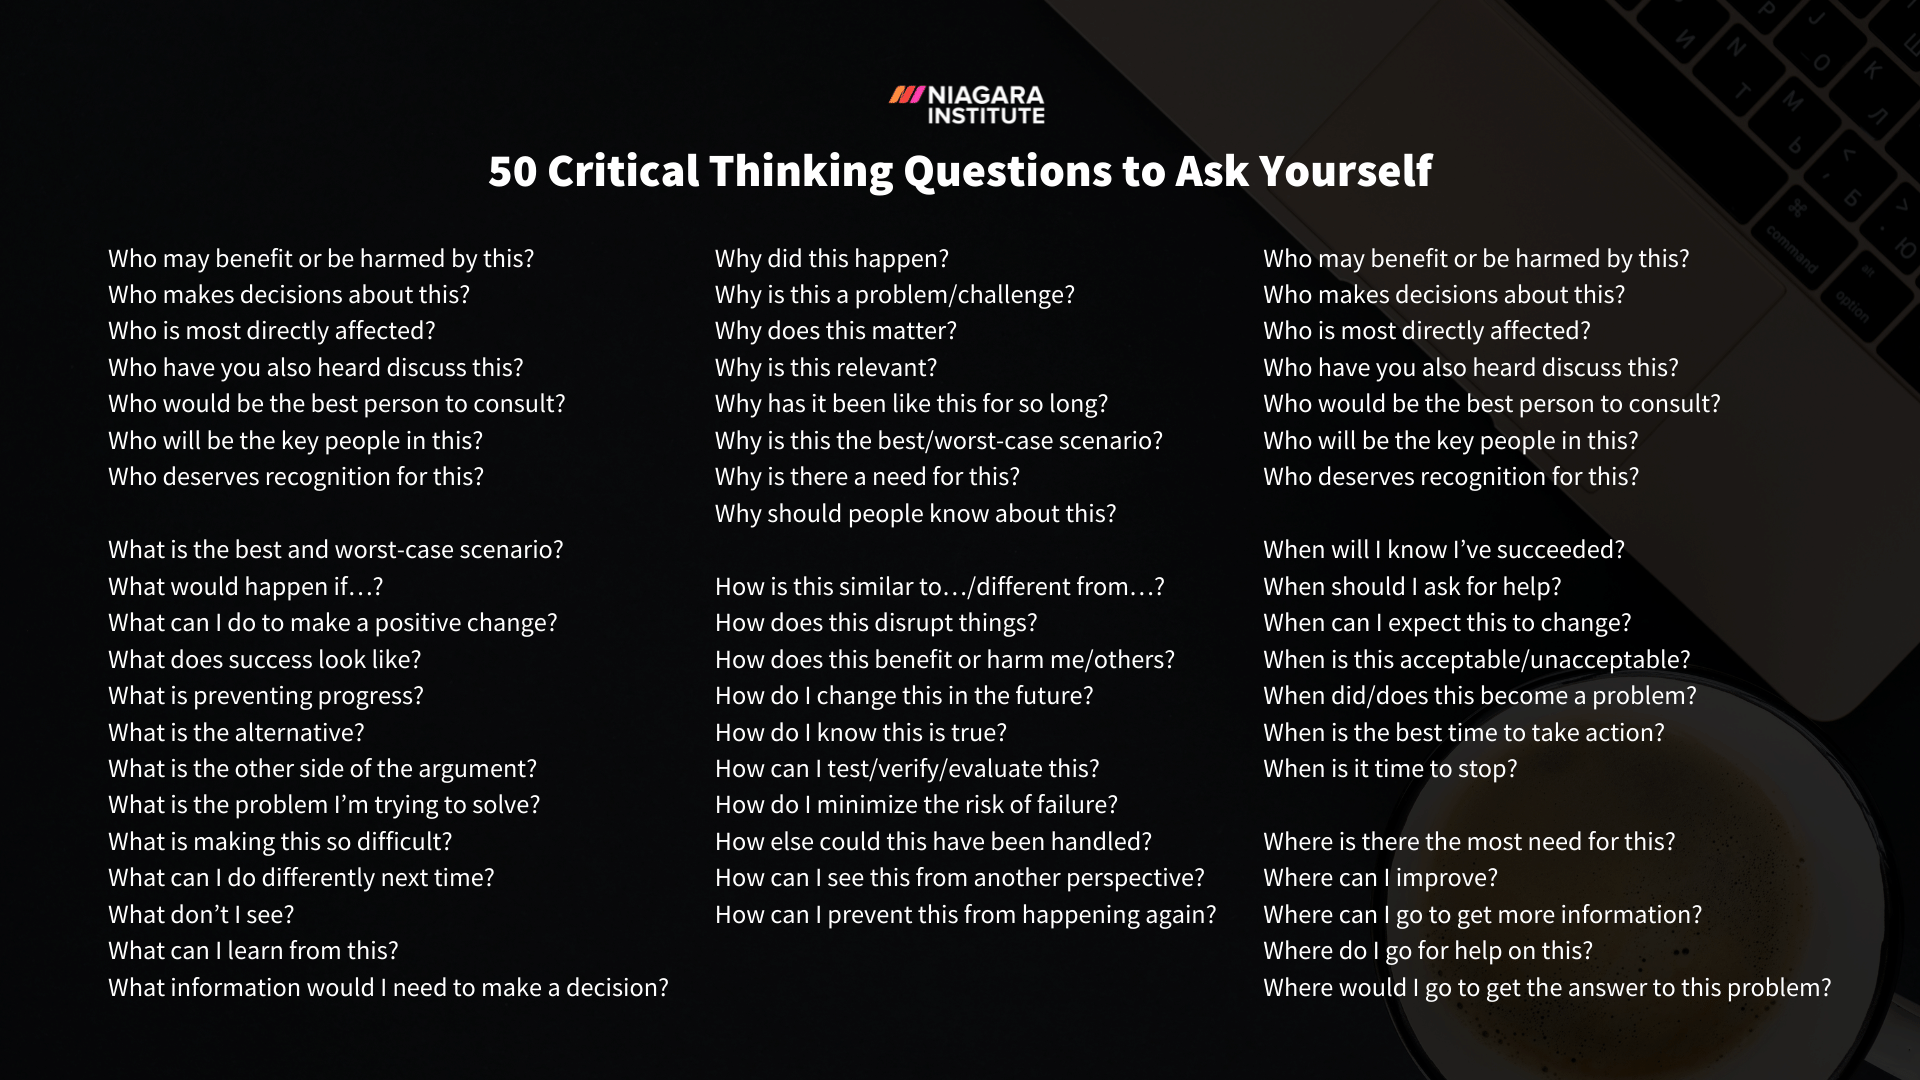 50 Critical Thinking Questions to Ask Yourself